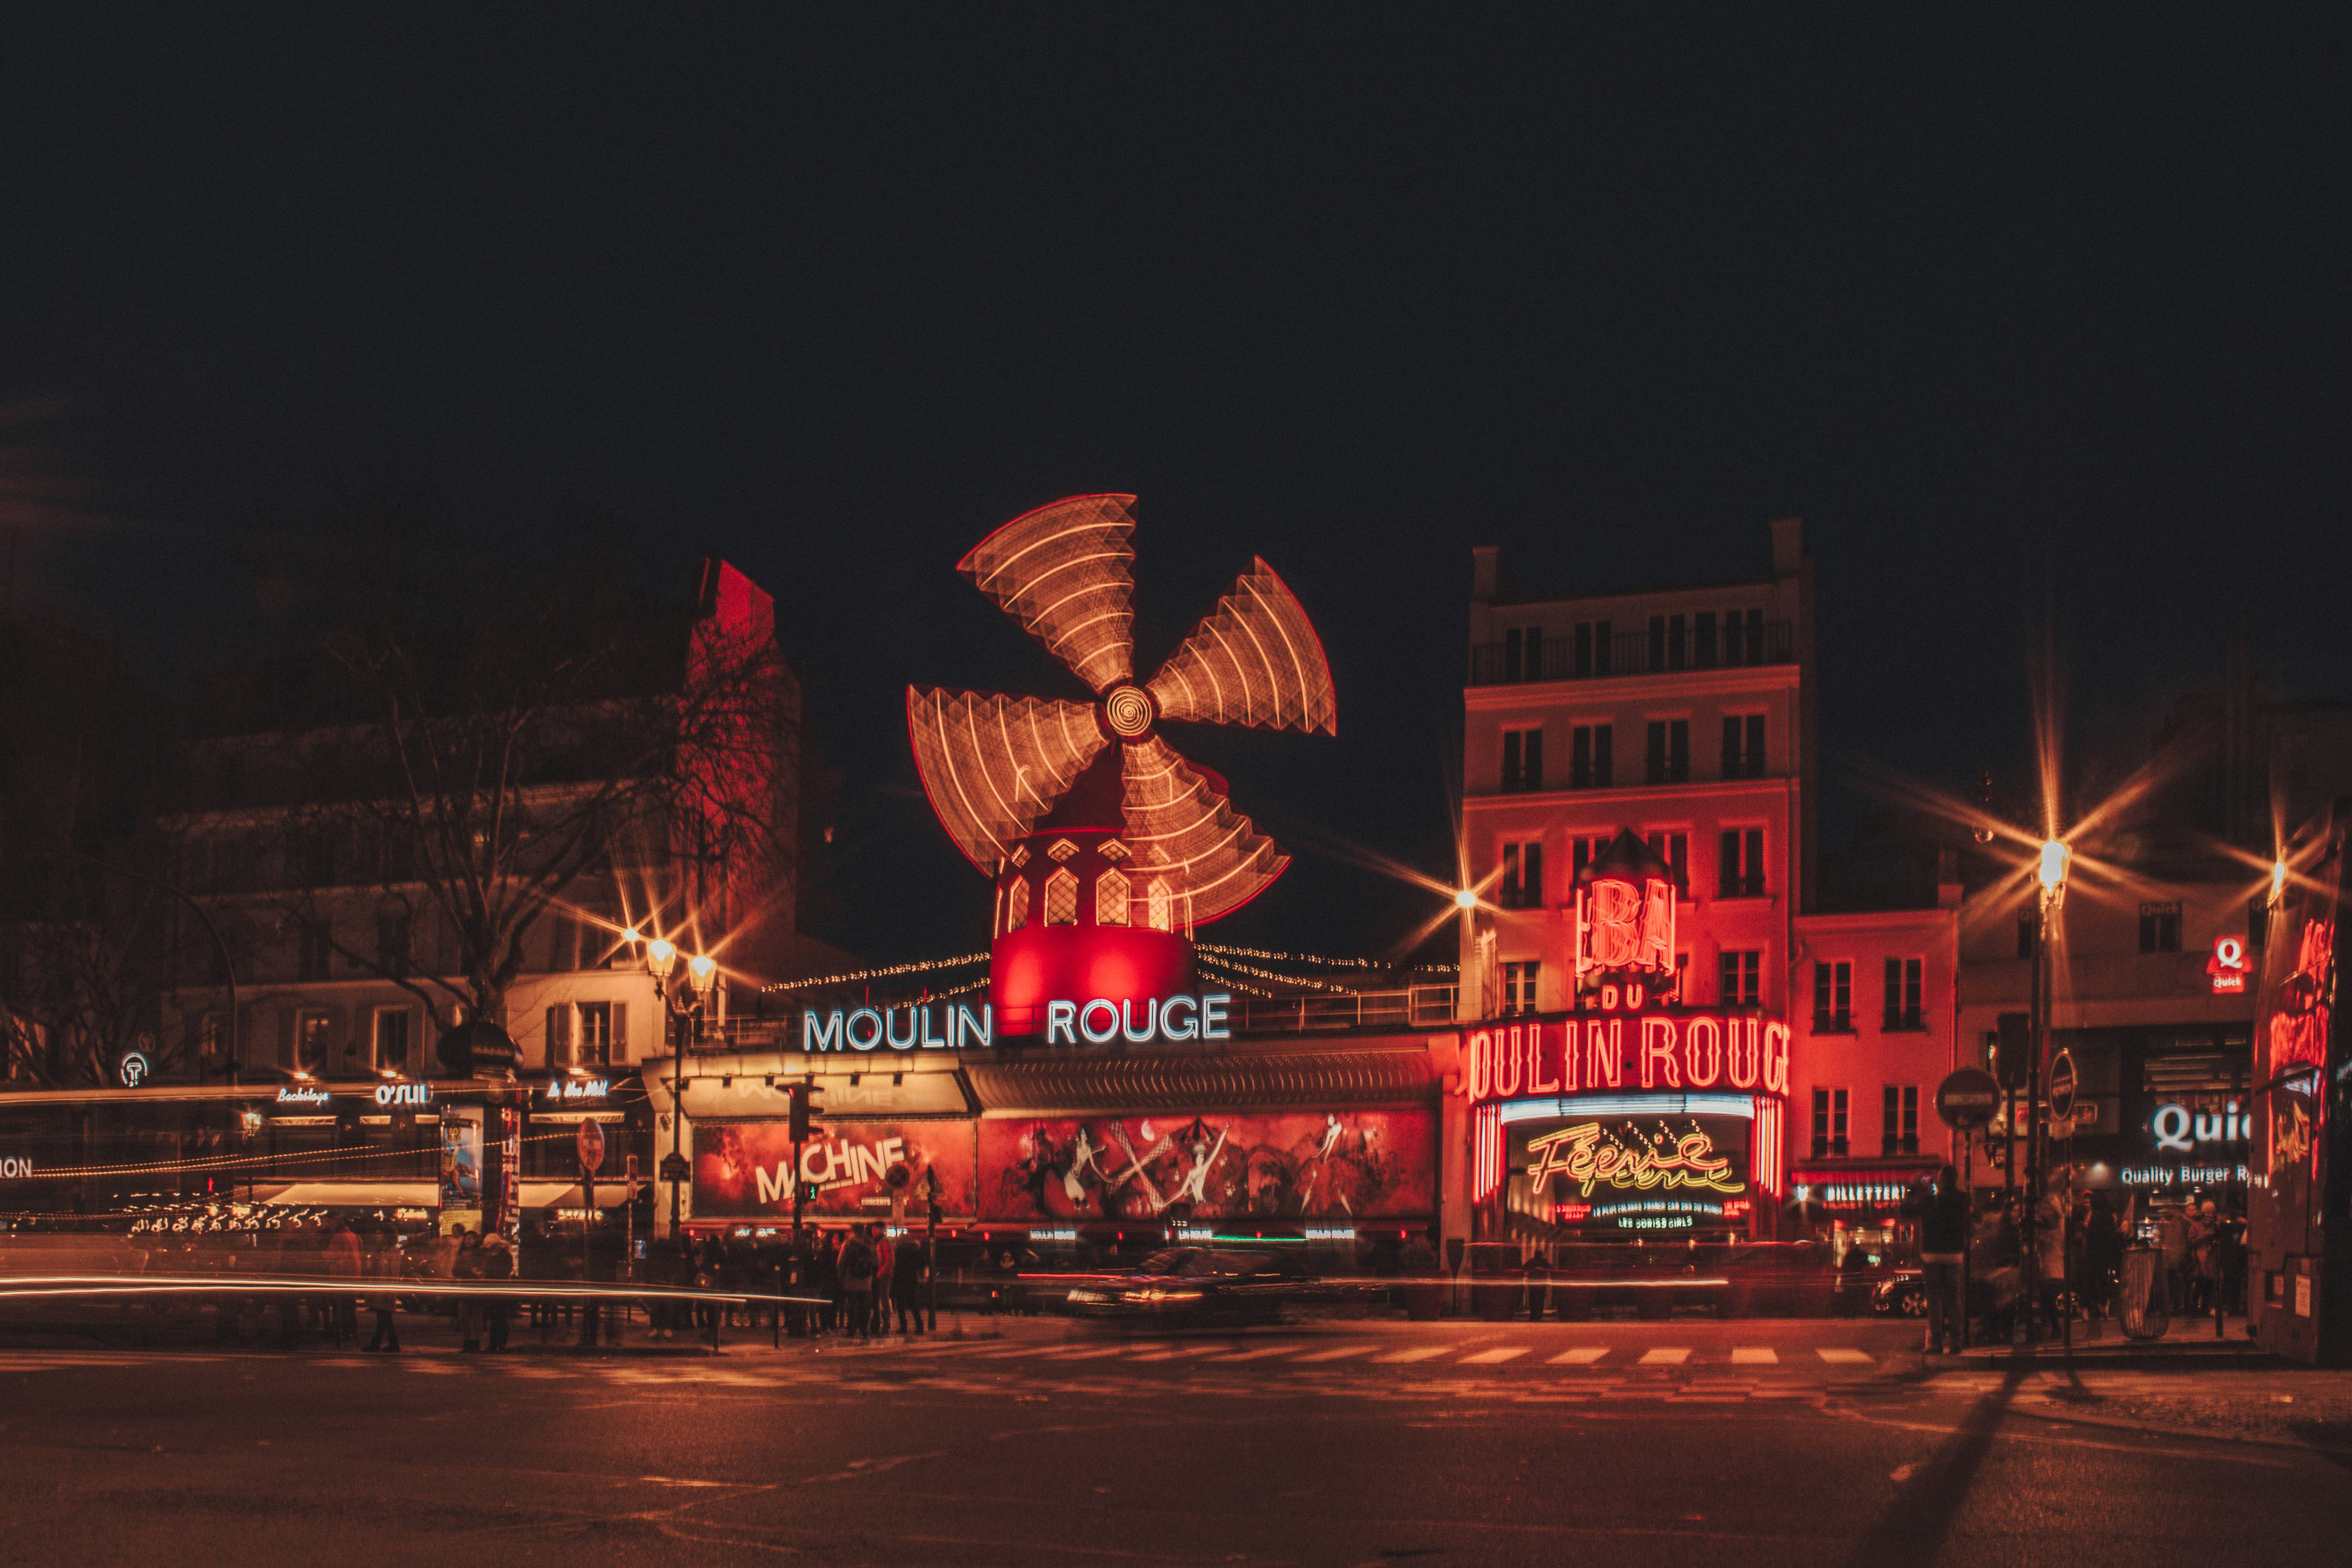 Moulin rouge, Pigalle